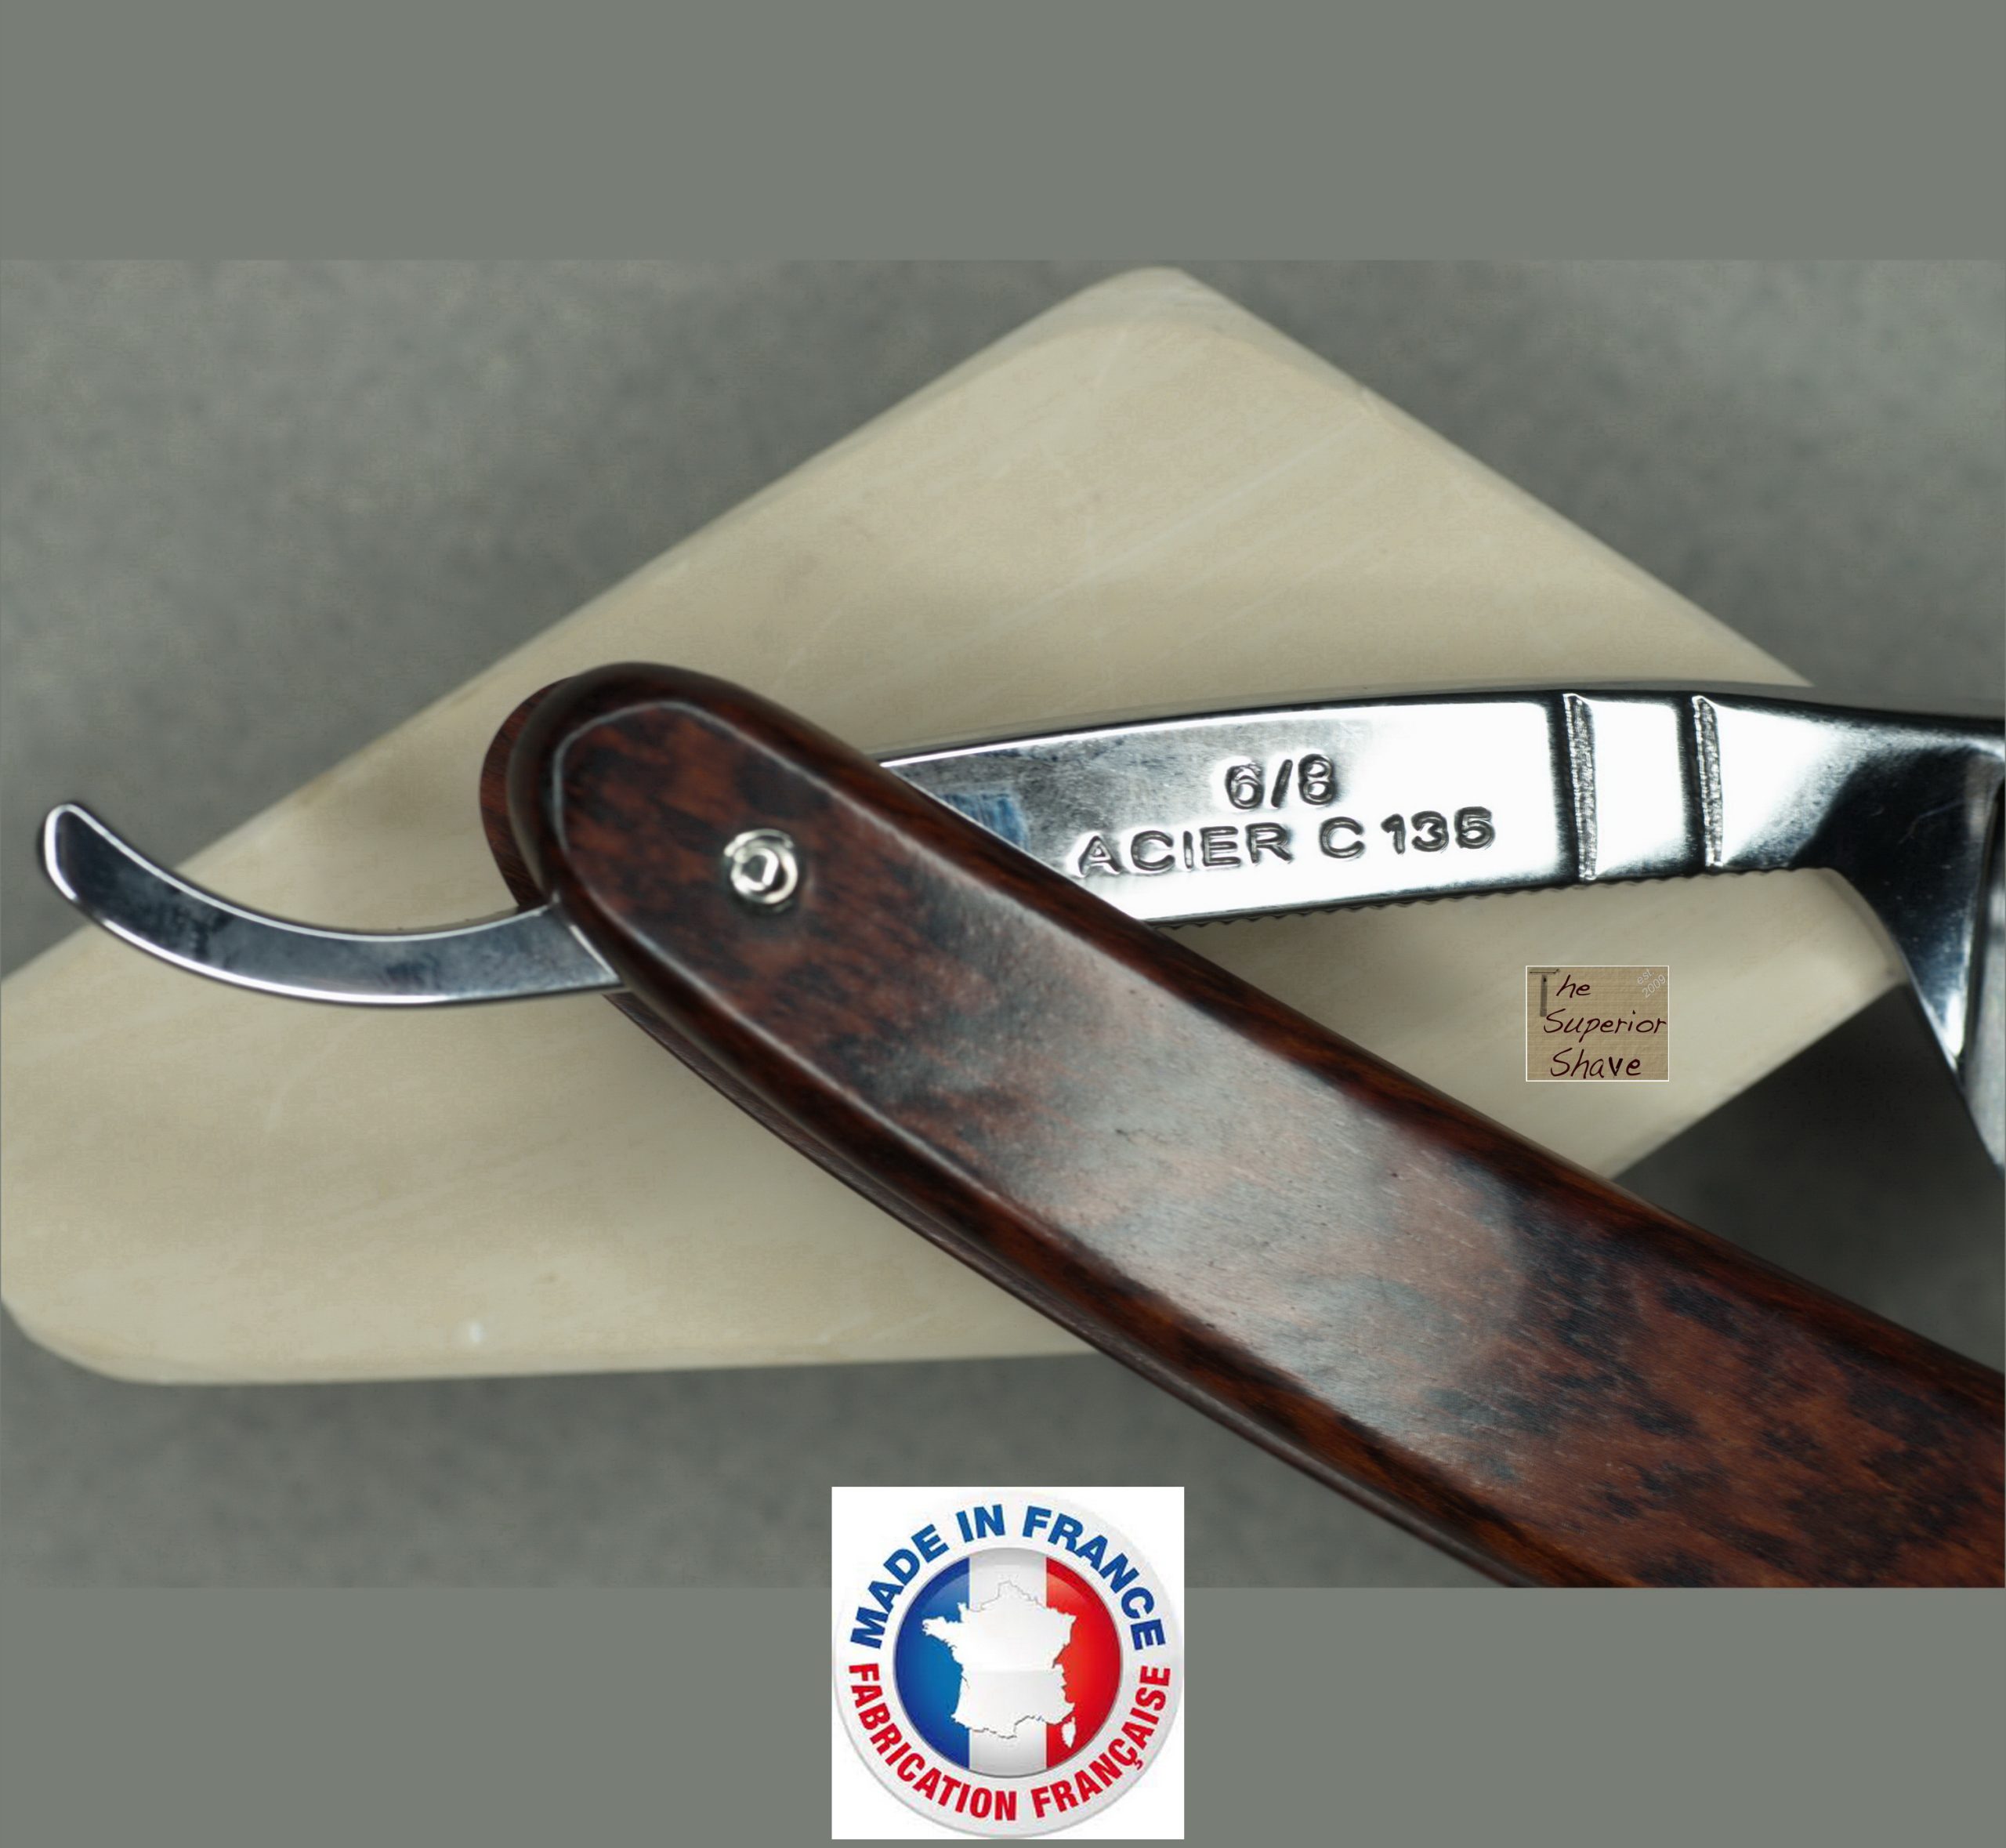 Thiers Issard 275 Le Grelot | | 6/8 | Steel Superior in The | Round Hollow Straight – Point | French Shave Handle | Carbon Ground Razor Size Snakewood Made Full France